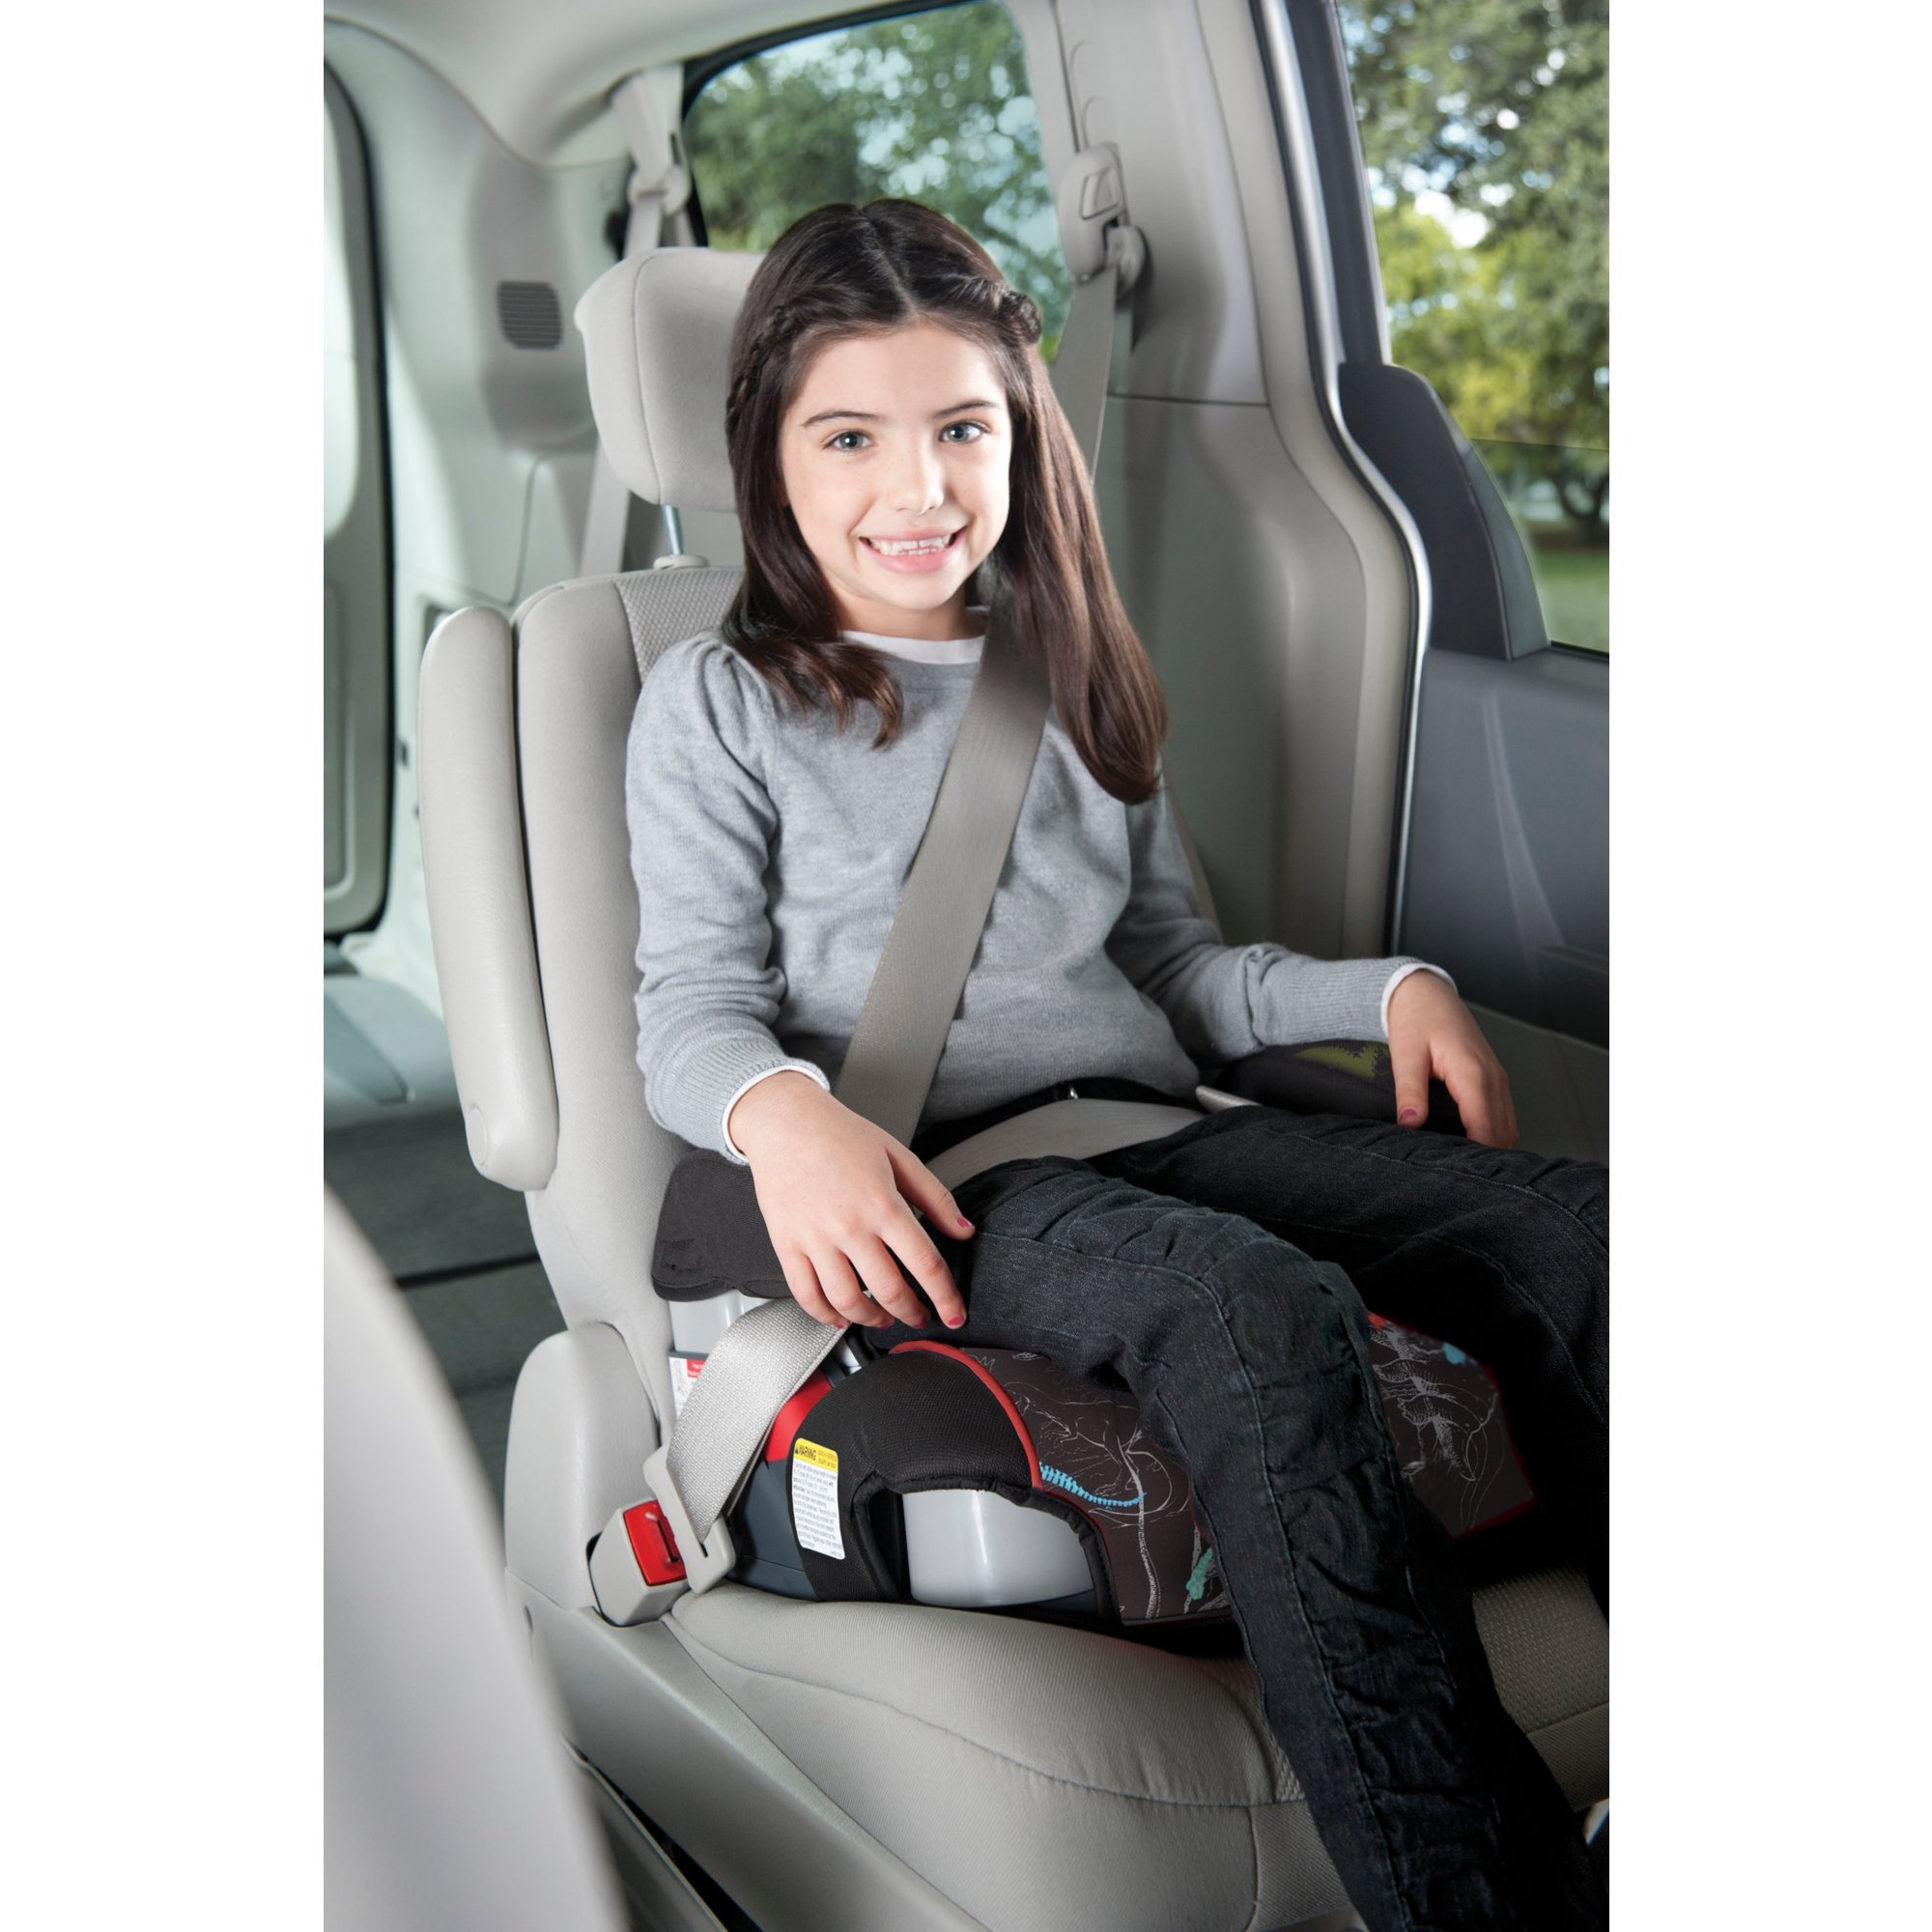 Srutirbo Car Booster Seat Cushion Raise The Height for Short People Driving Hip (Tailbone) and Lower Cack Fatigue Relief Suitable for Trucks, Cars